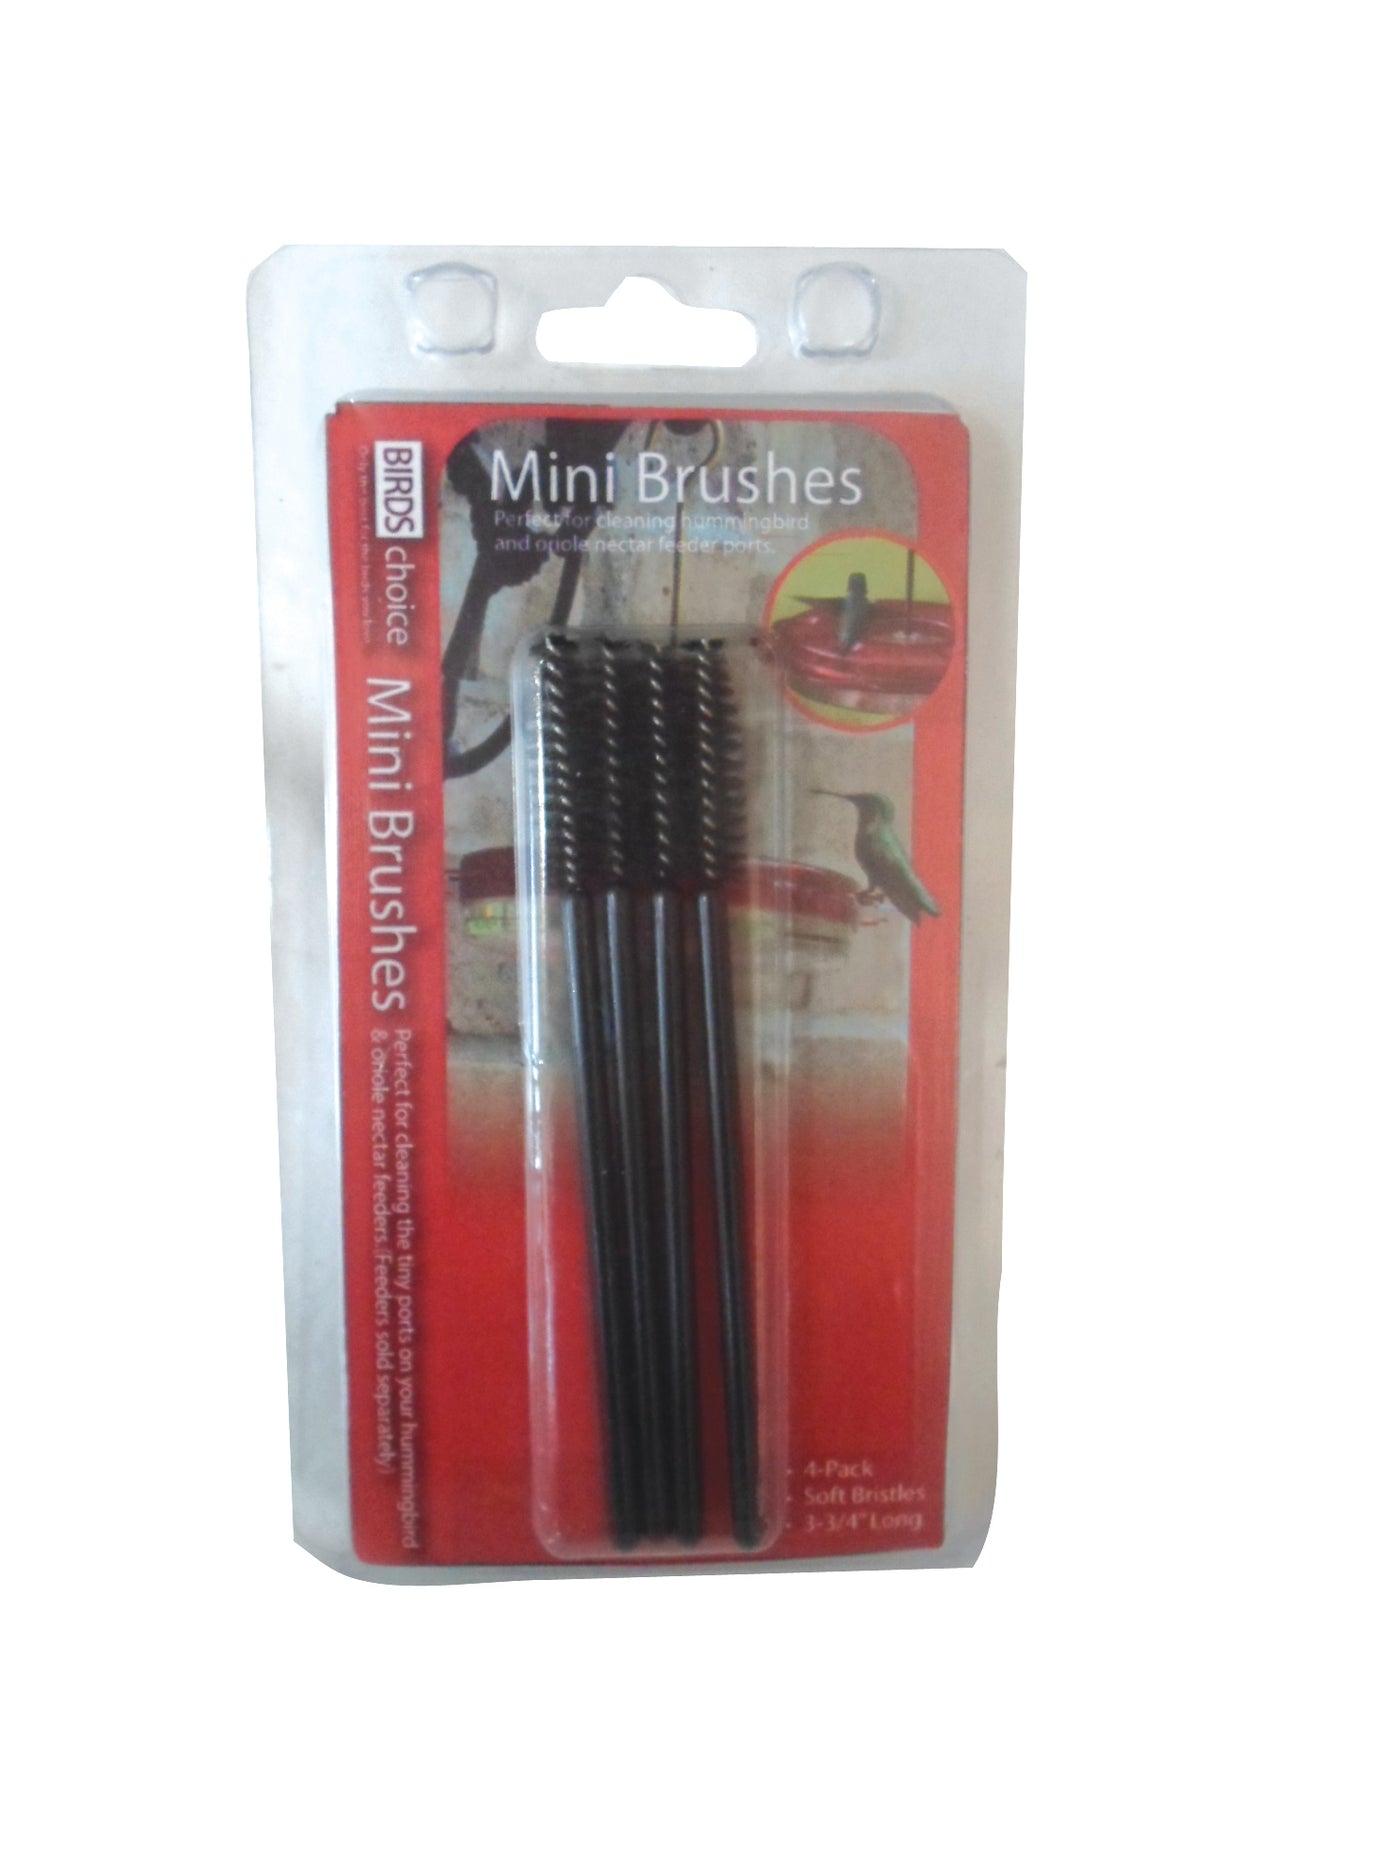 Mini Brushes for Cleaning Hummingbird Feeder Ports - Birds Choice